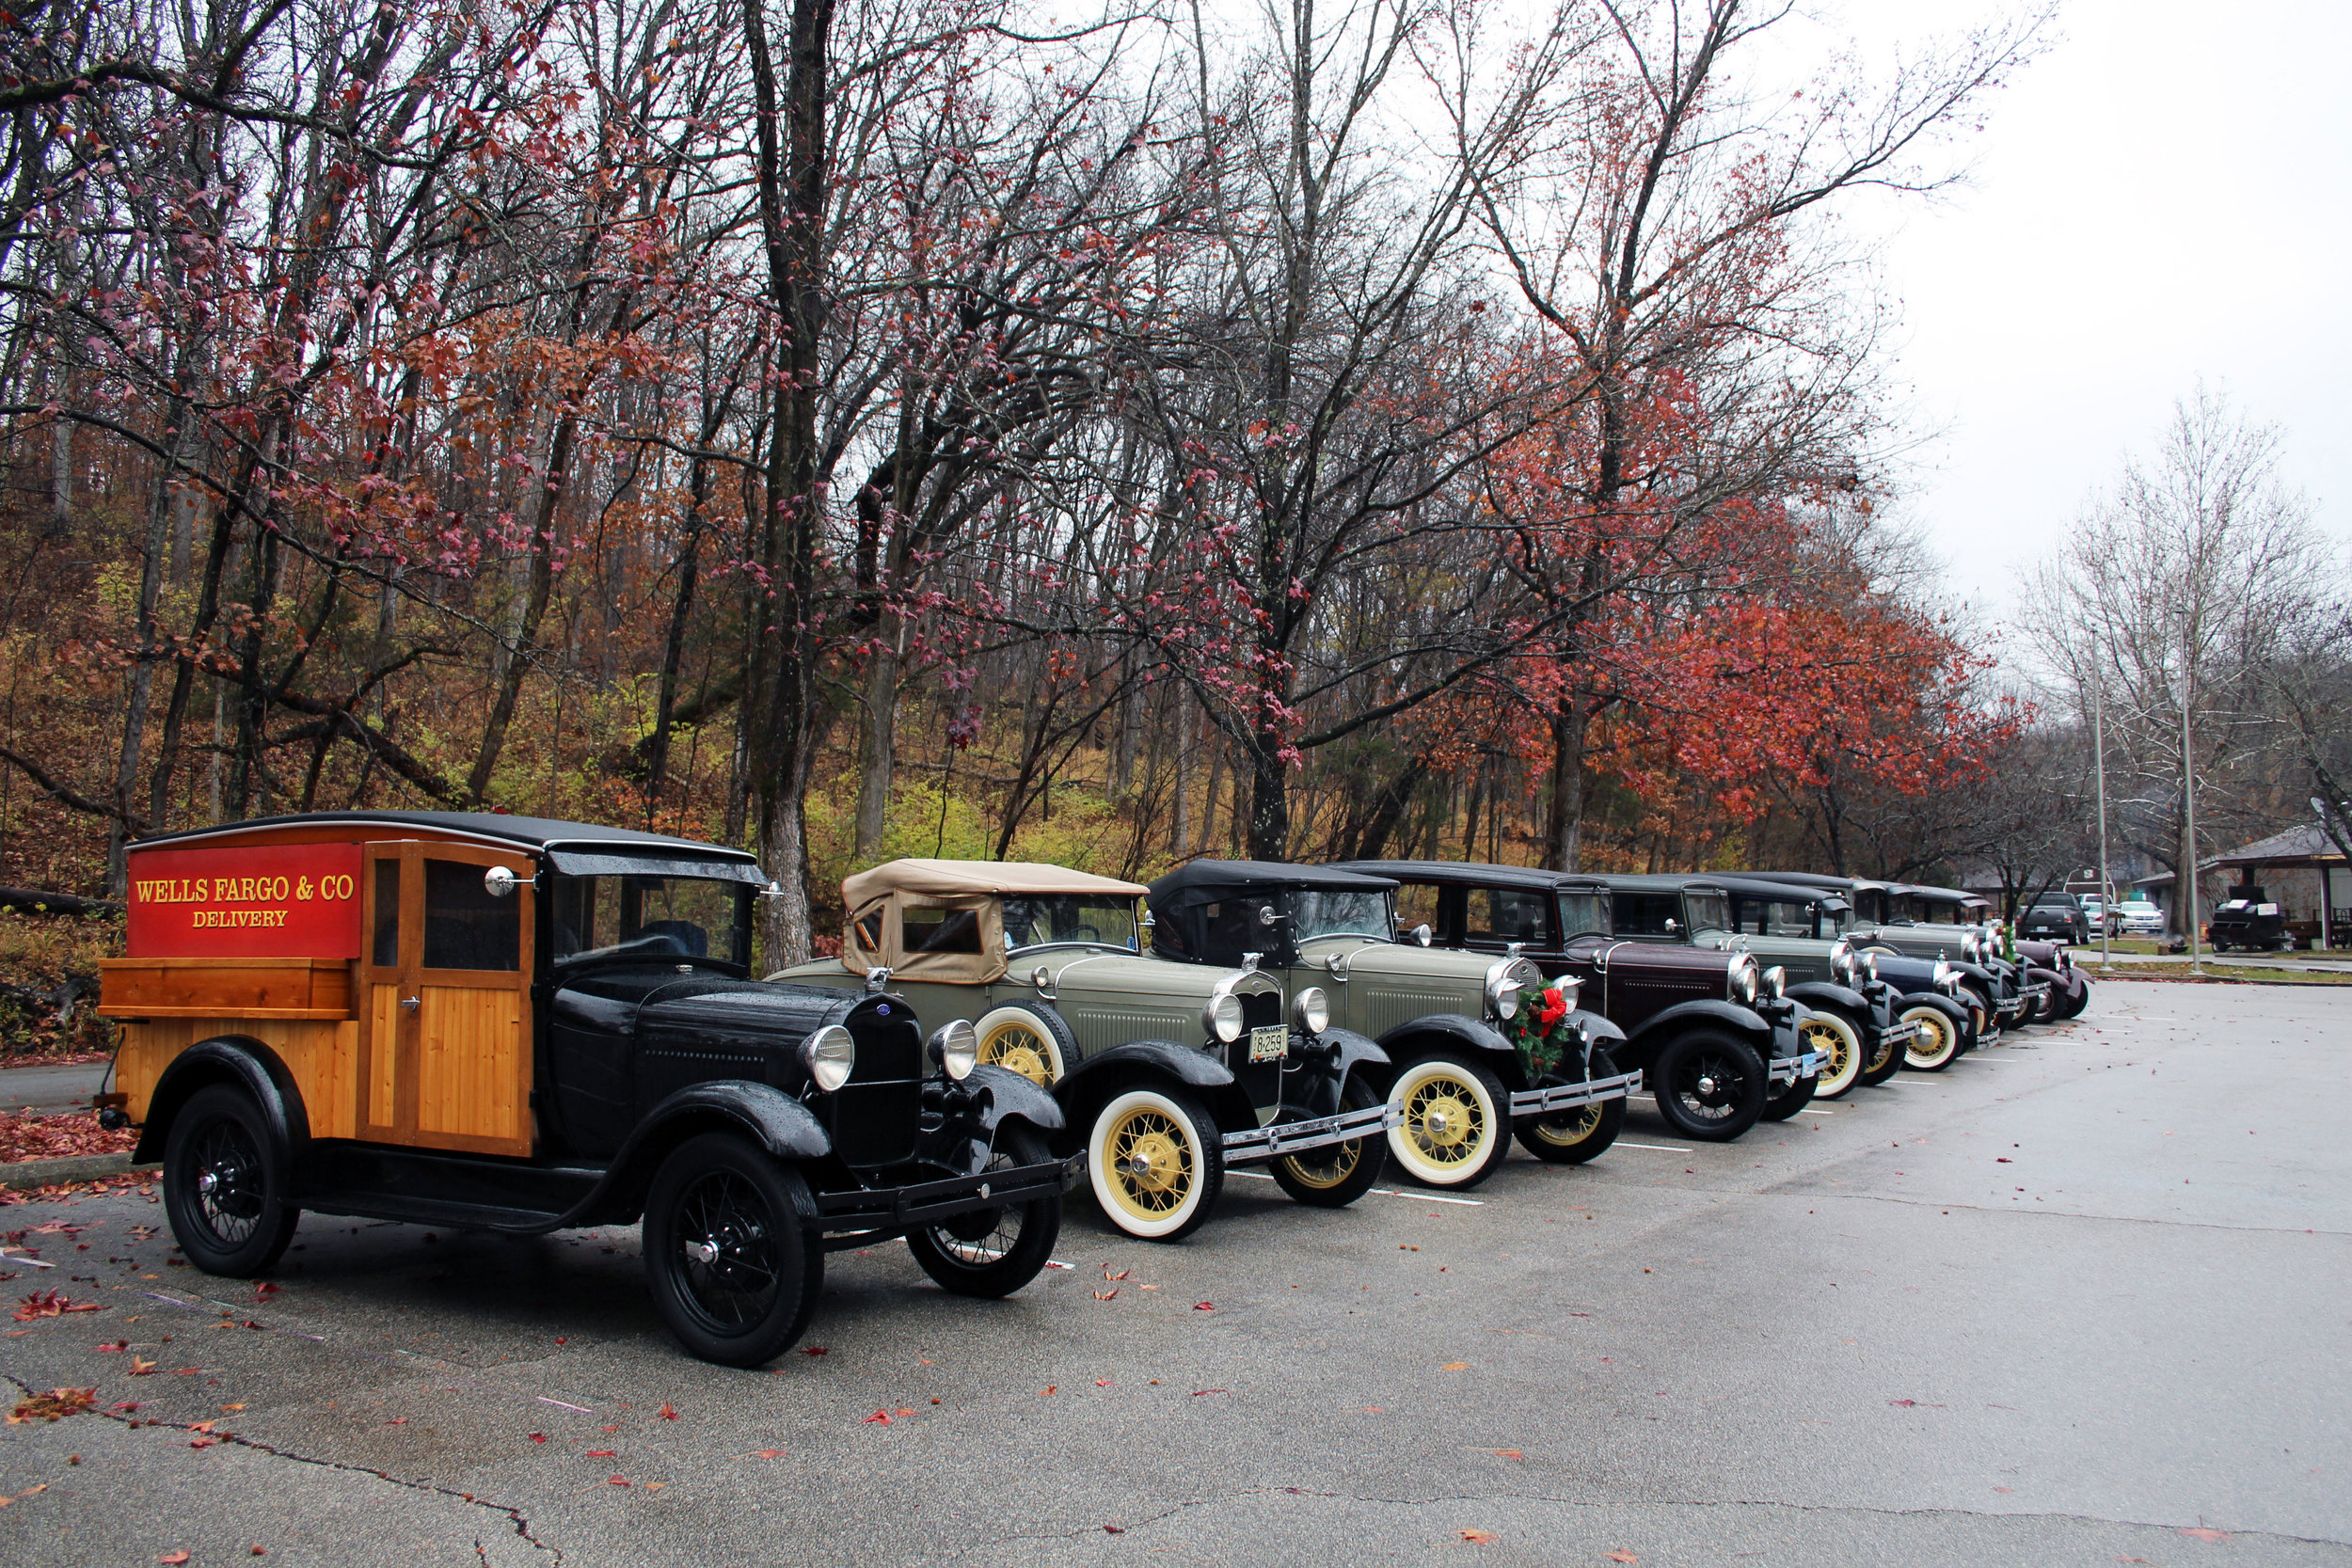   Nine Model A's battled the poor weather and came "rain or shine"  